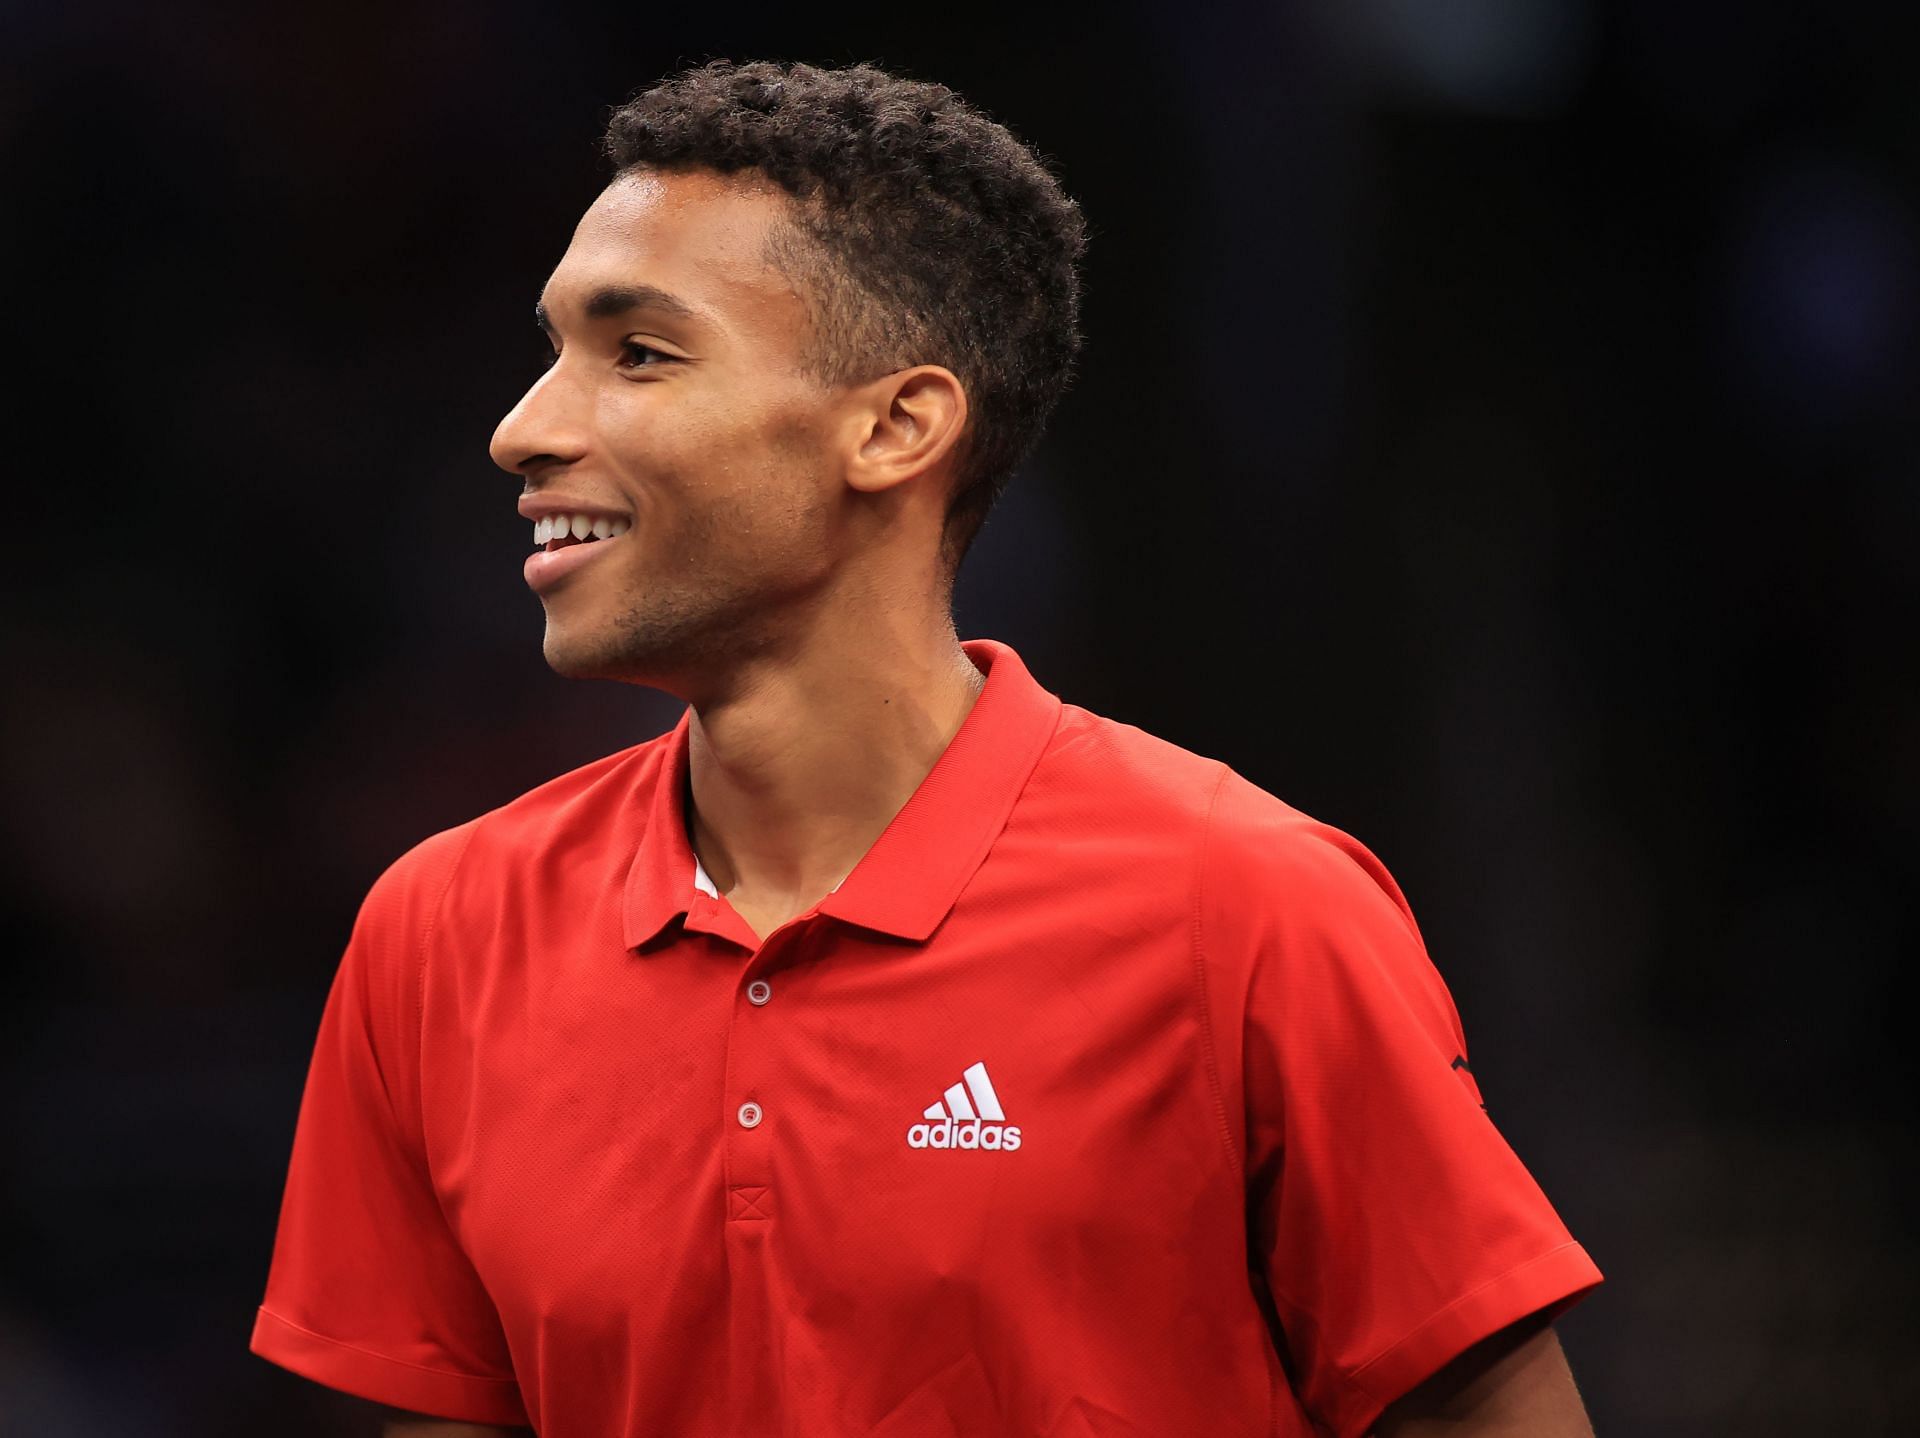 Felix Auger-Aliassime at the 2021 Laver Cup